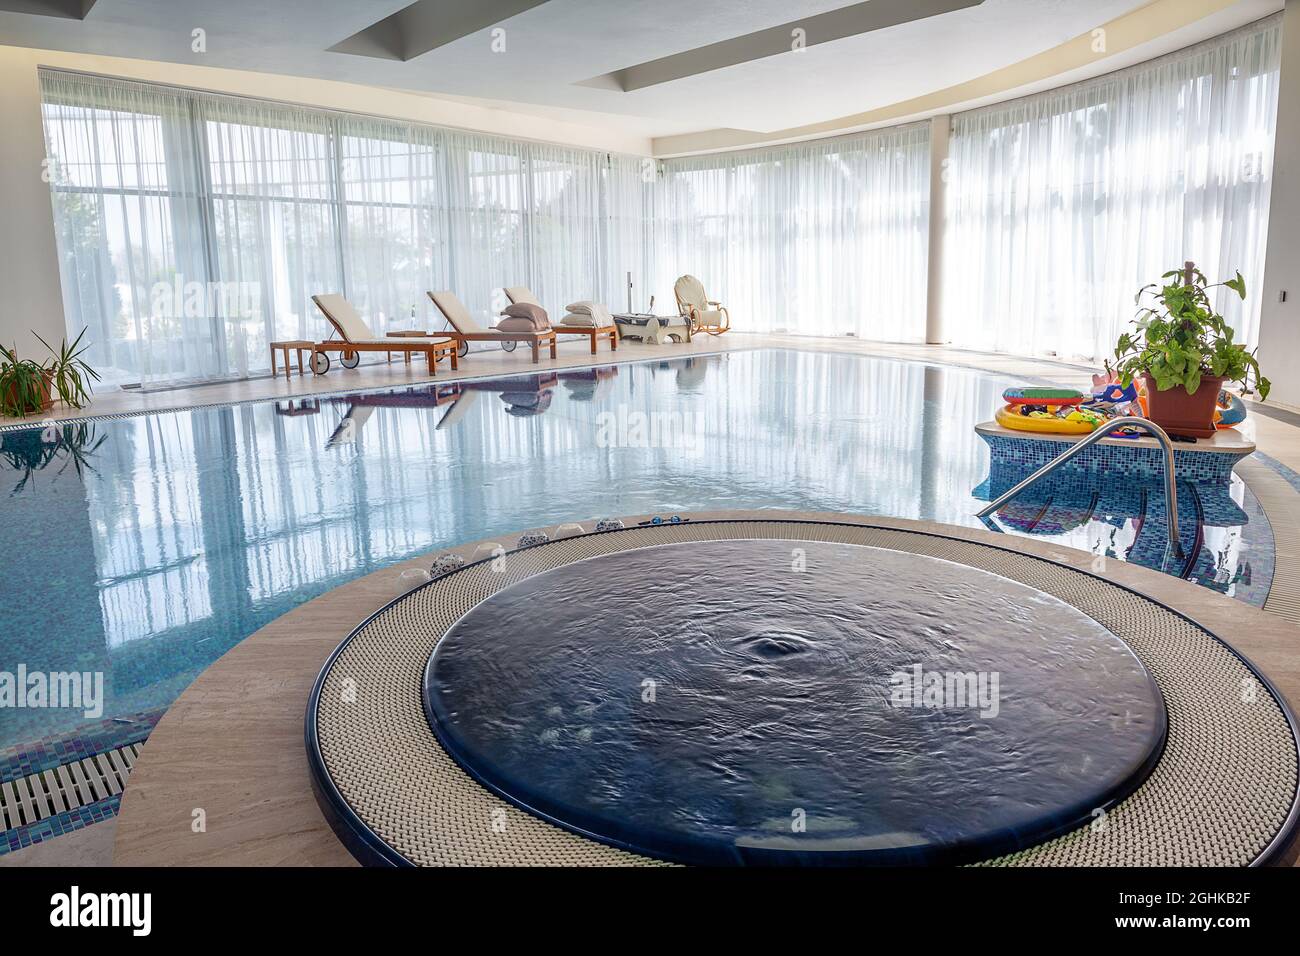 Relaxation area near indoor swimming pool with jacuzzi and loungers in country mansion Stock Photo